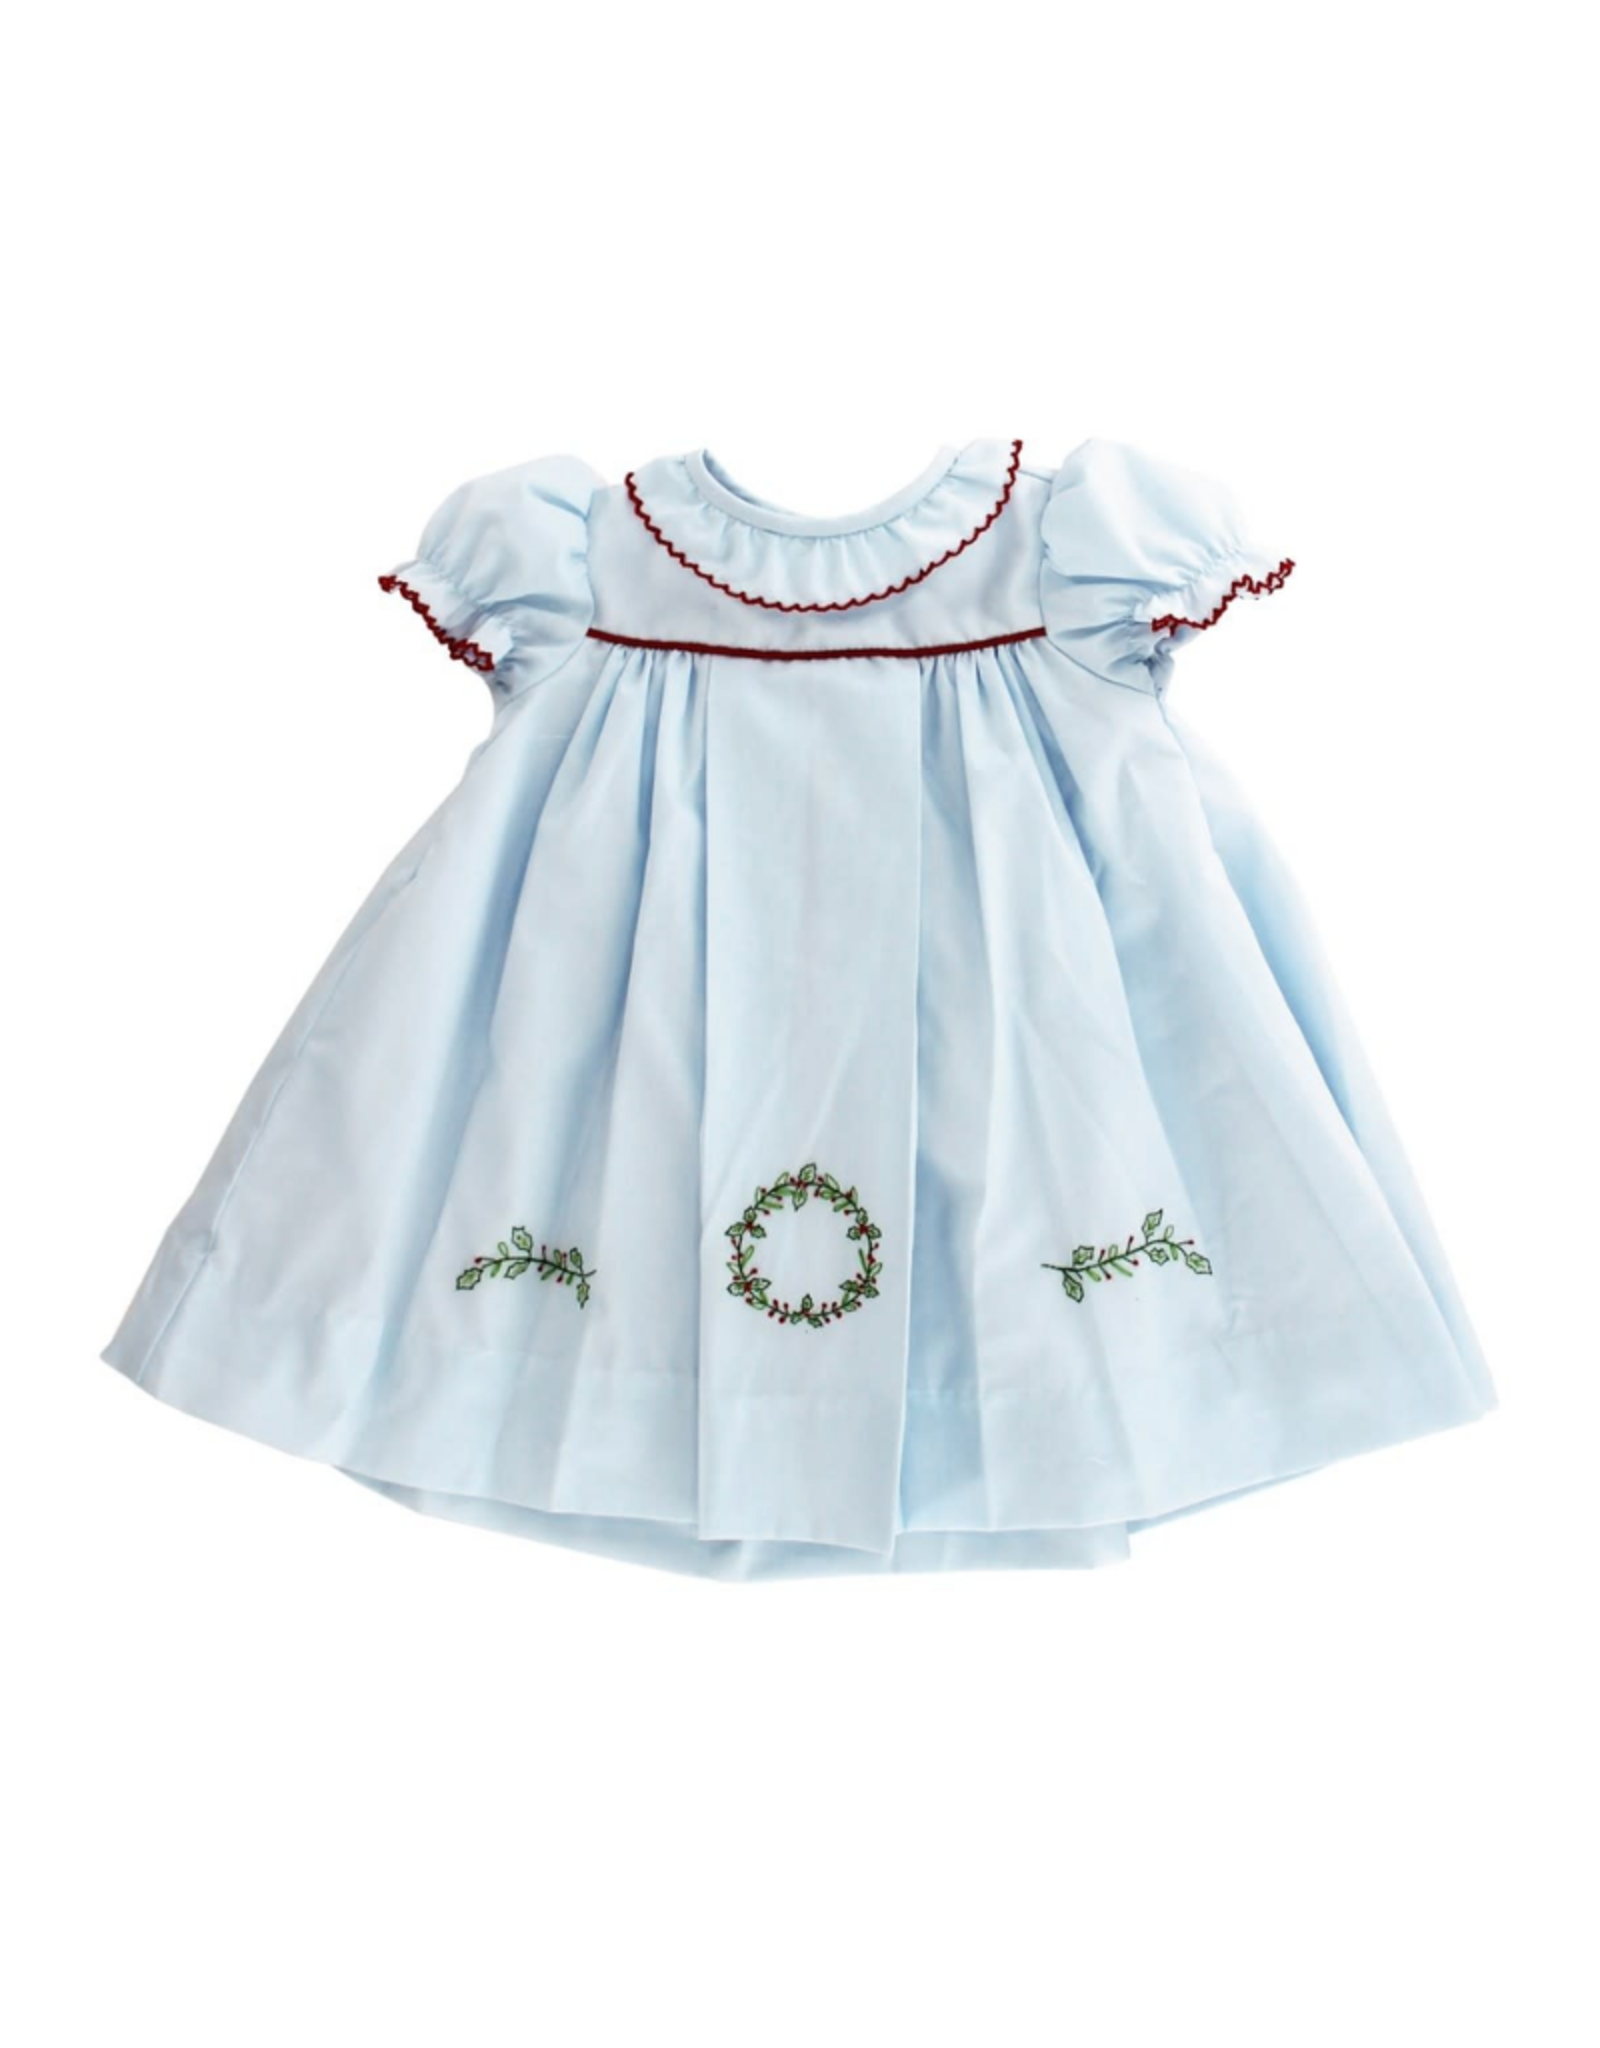 The Bailey Boys Embroidered Wreath on Blue Float Dress